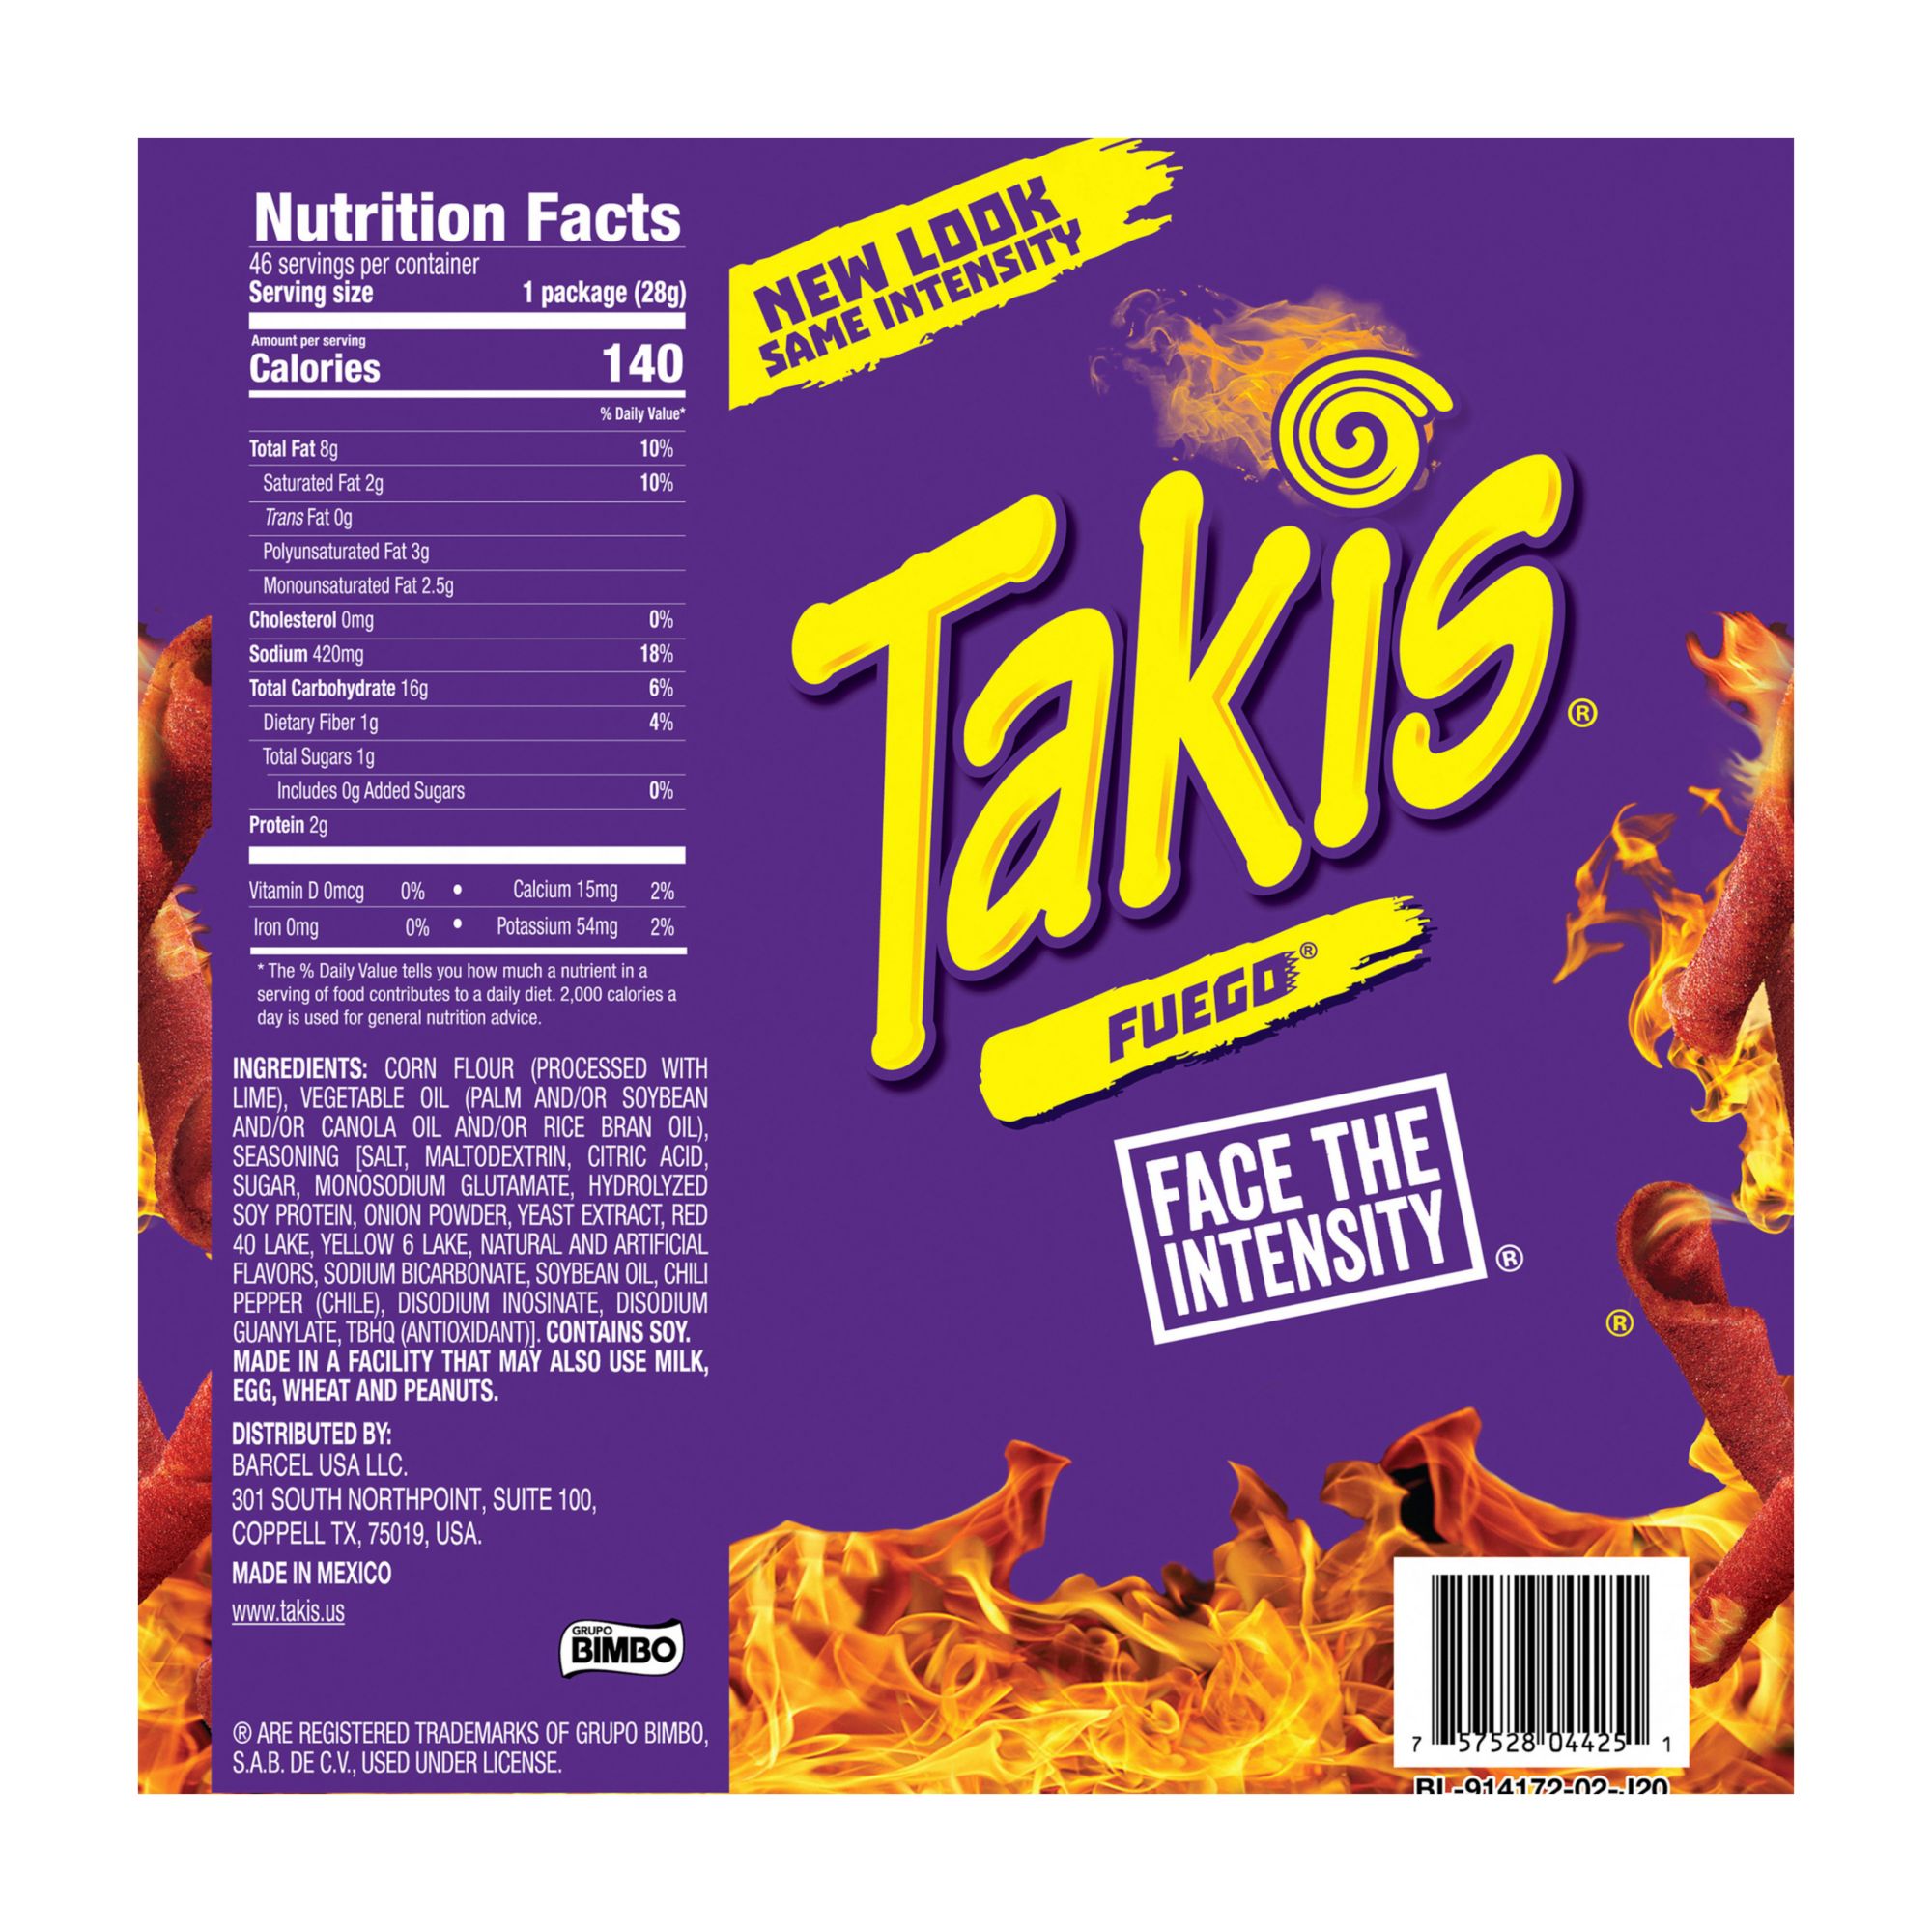 Takis Fuego Rolled Tortilla Chips